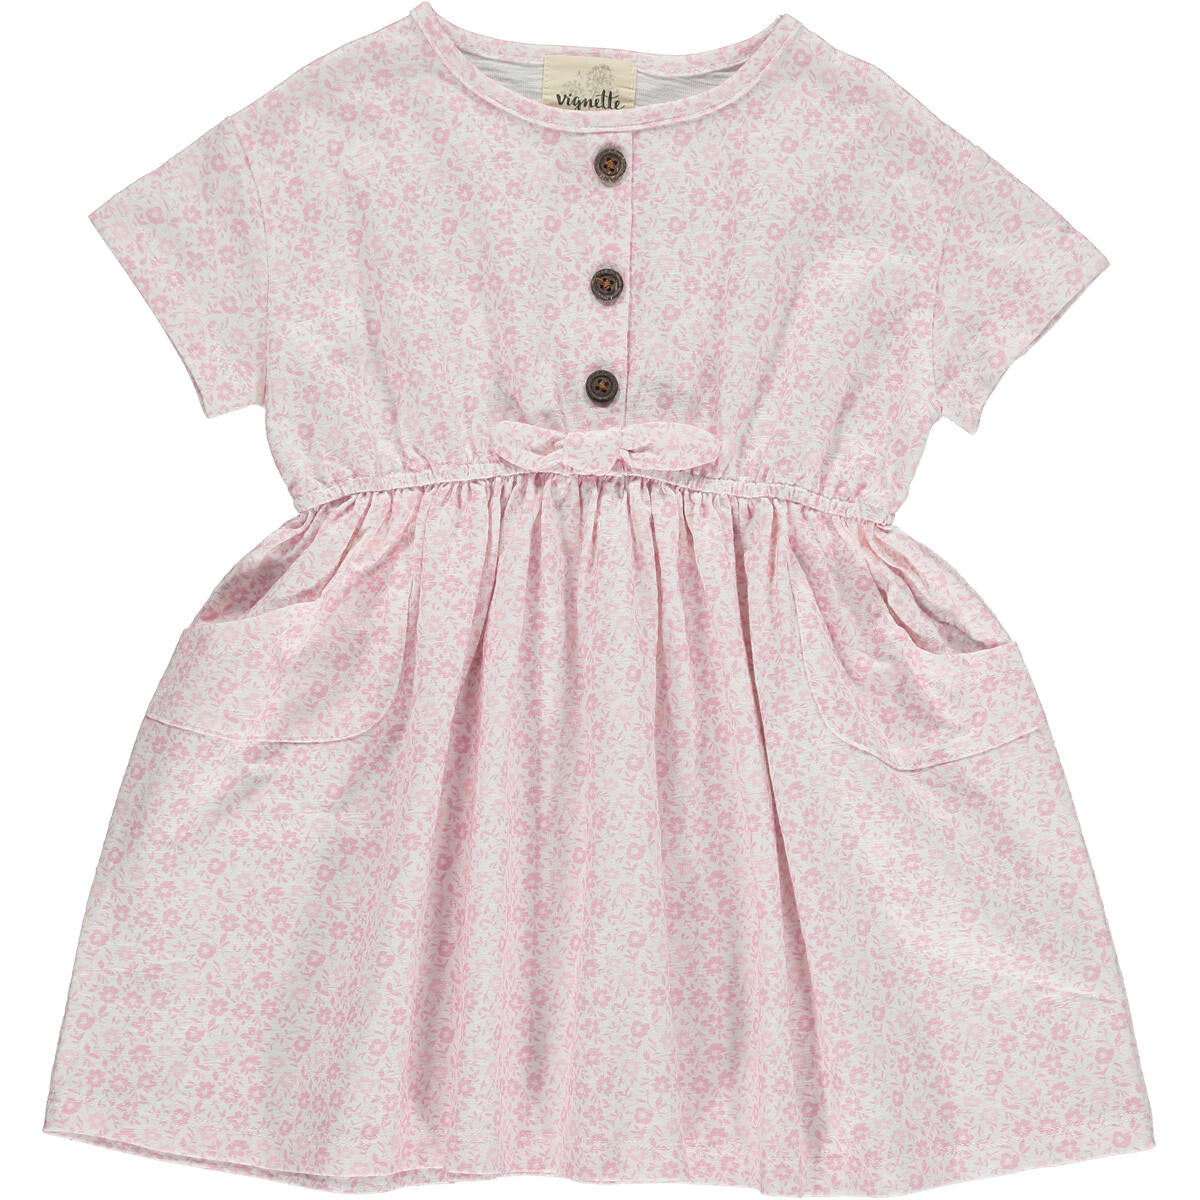 Daisy Dress - Pink Ditsy Floral